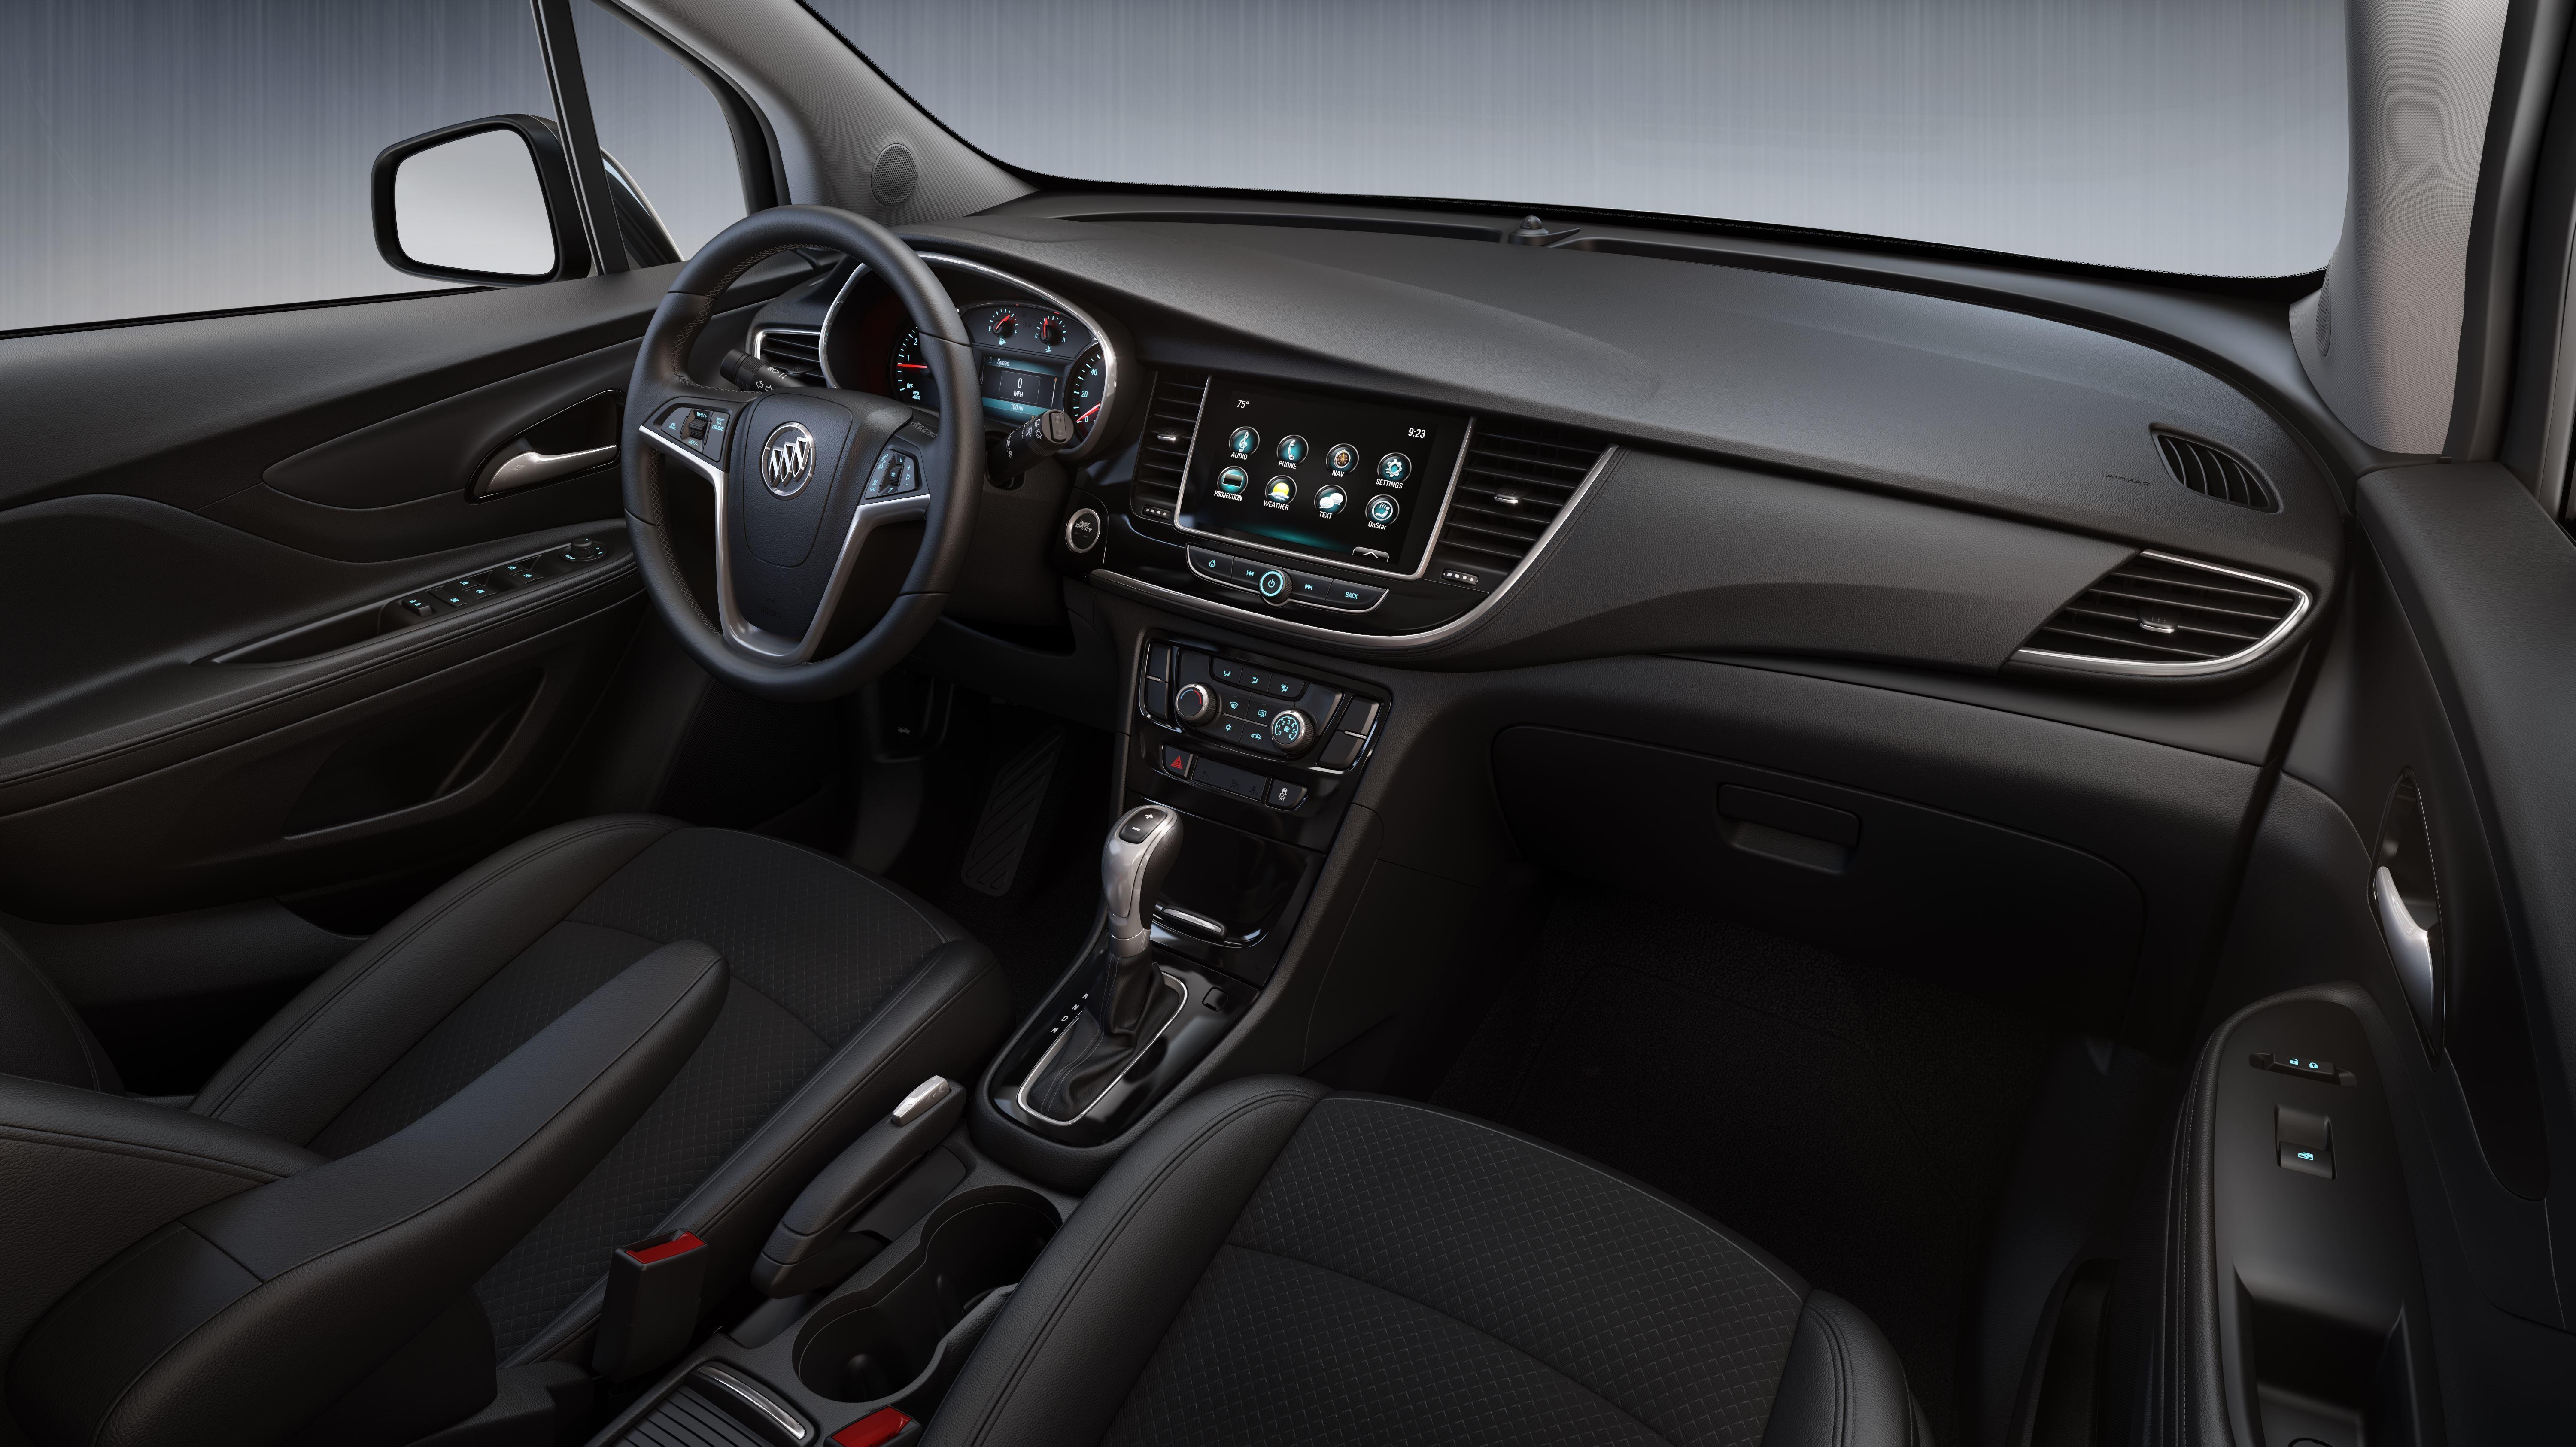 View the BUick Encore's at SHortline